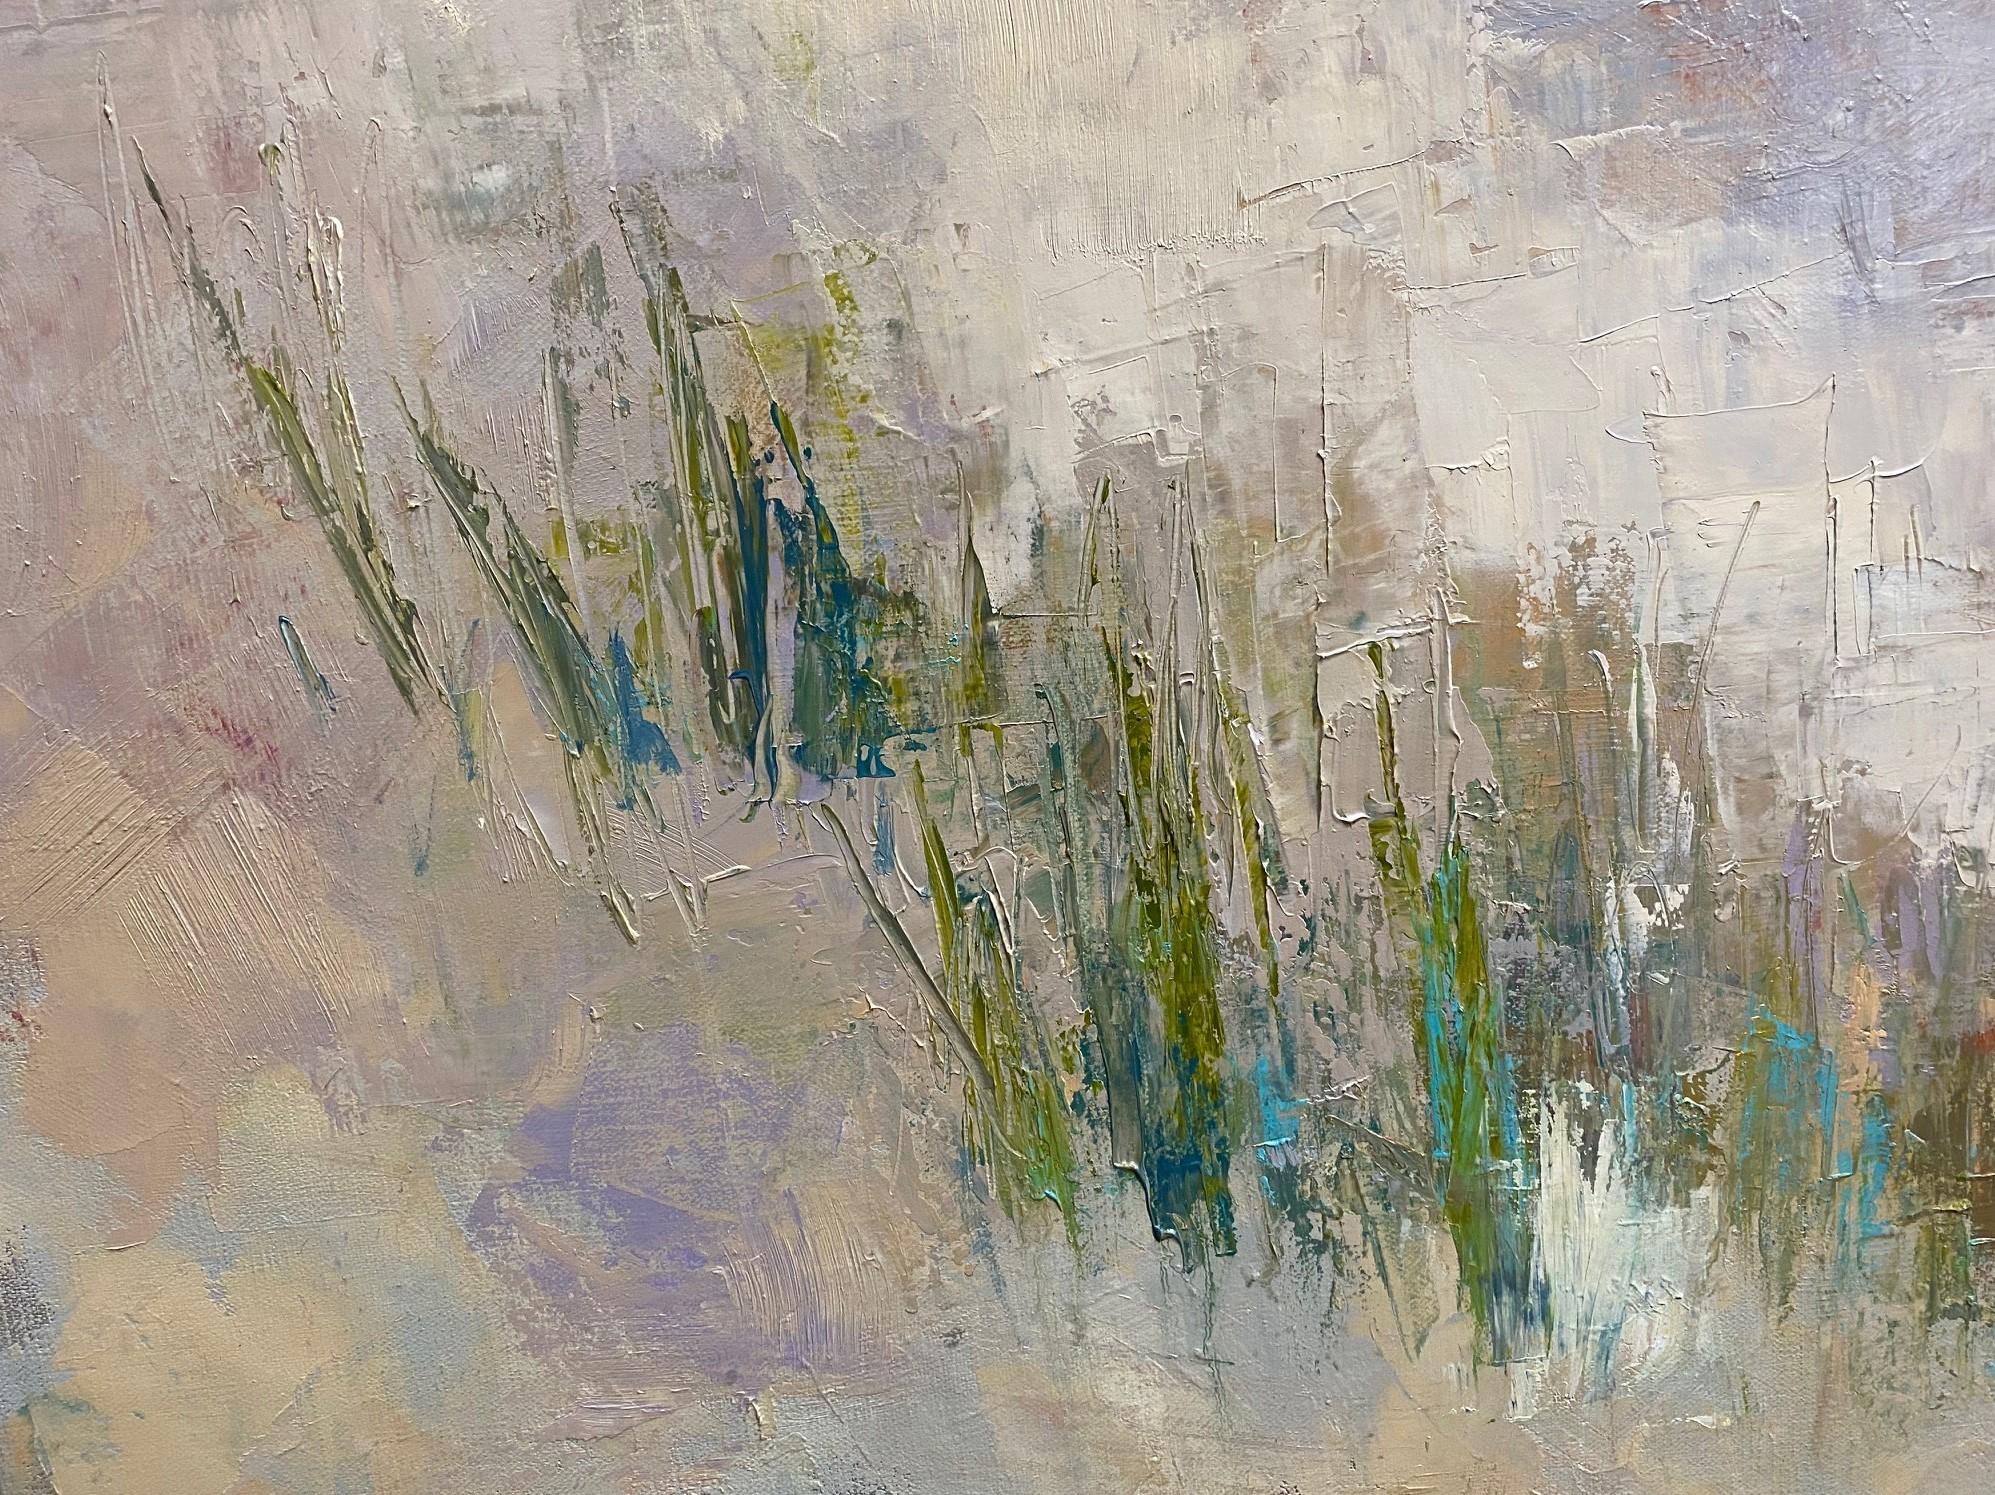 Coastal Walk, original 40x30 abstract expressionist marine landscape - Abstract Expressionist Painting by Allison Chambers